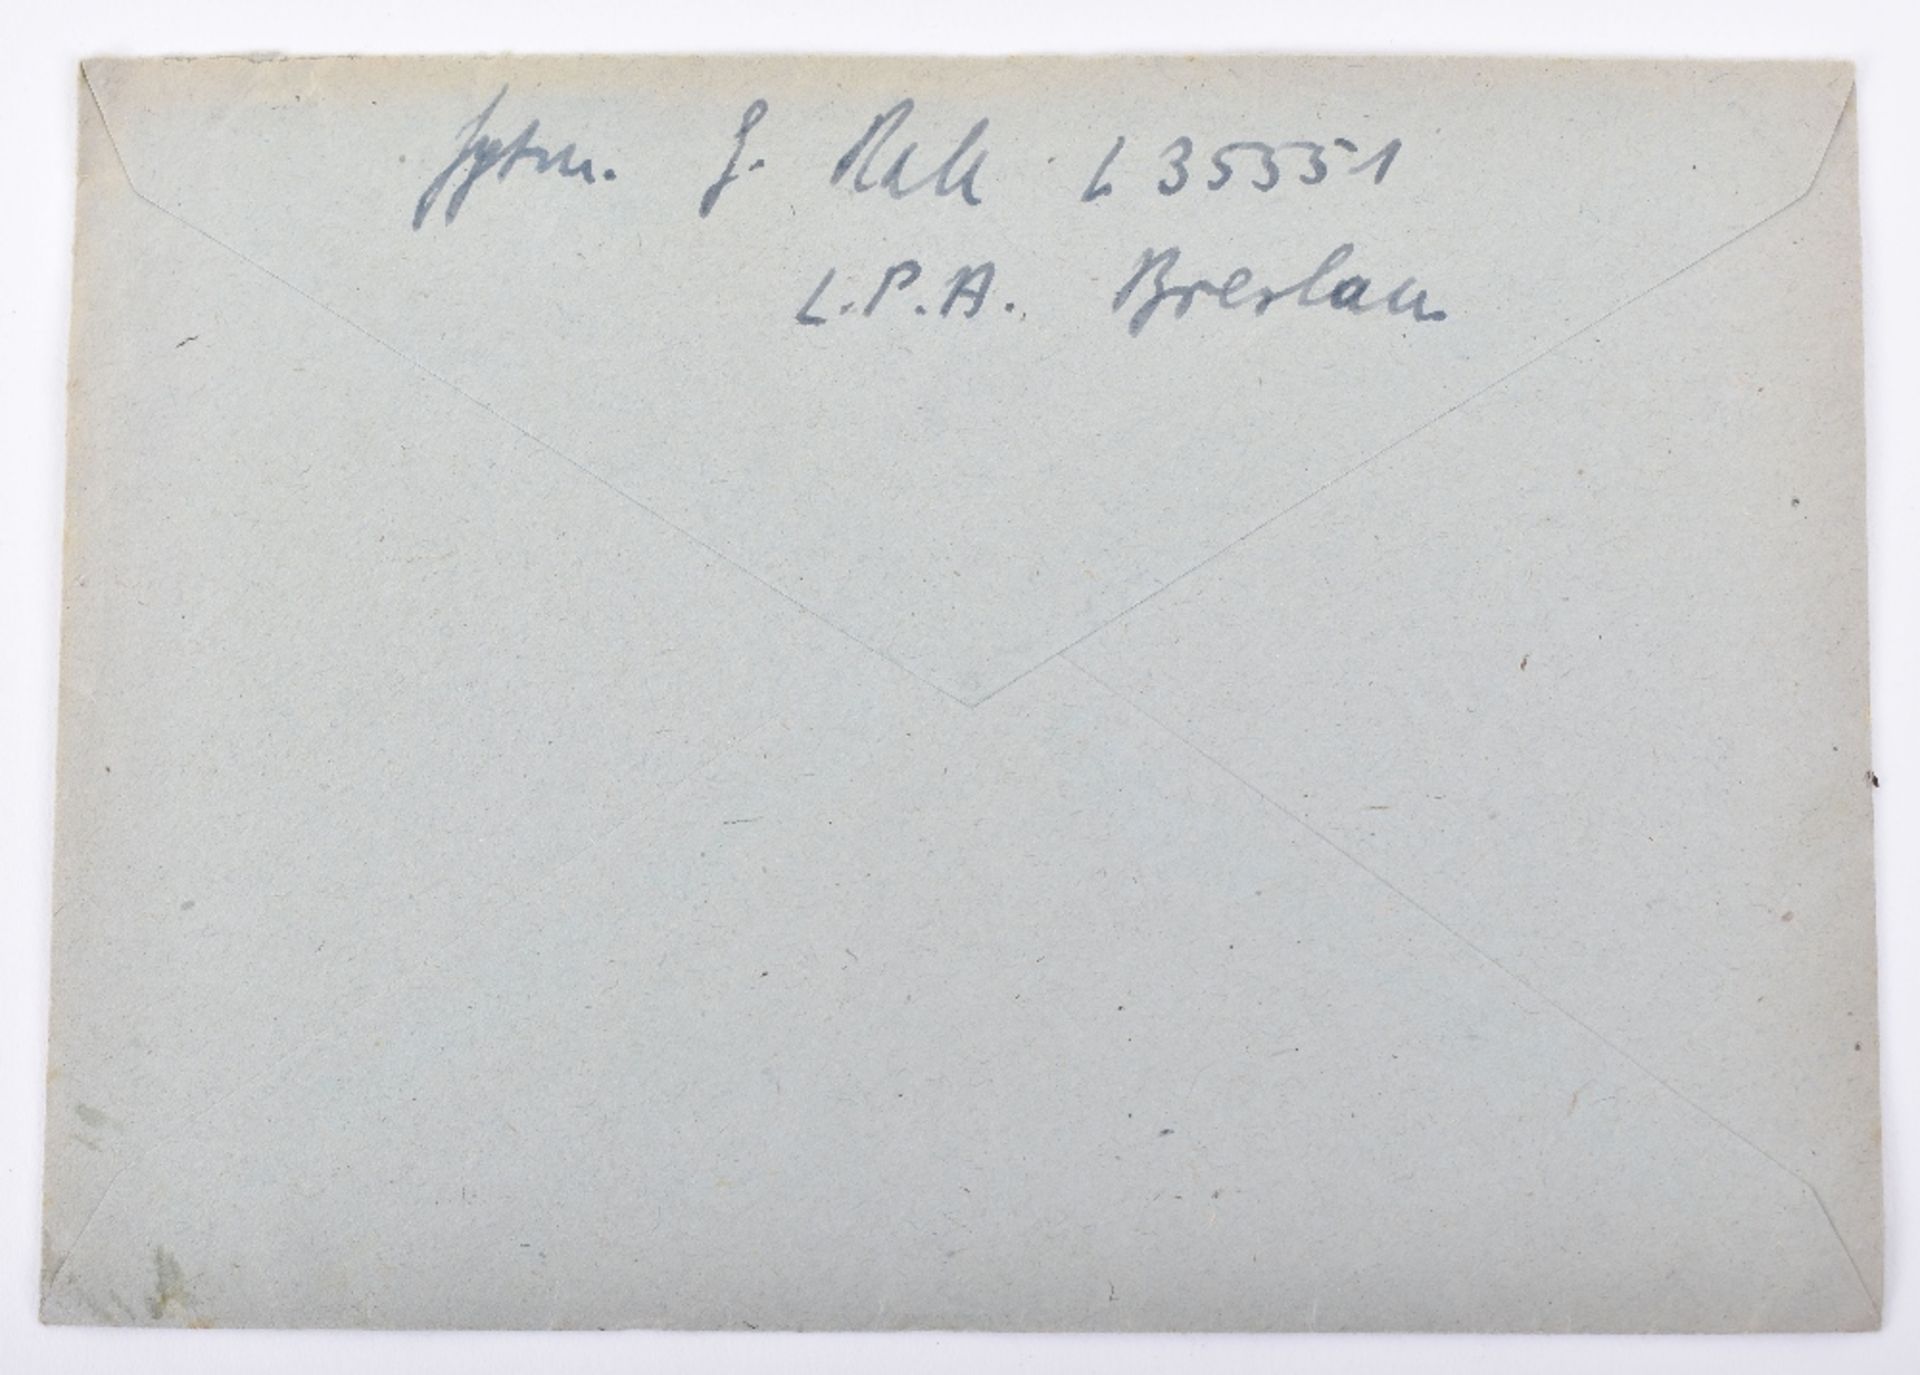 1943 Dated Feldpost Envelope Addressed to Gunther Rall’s Wife - Image 2 of 2